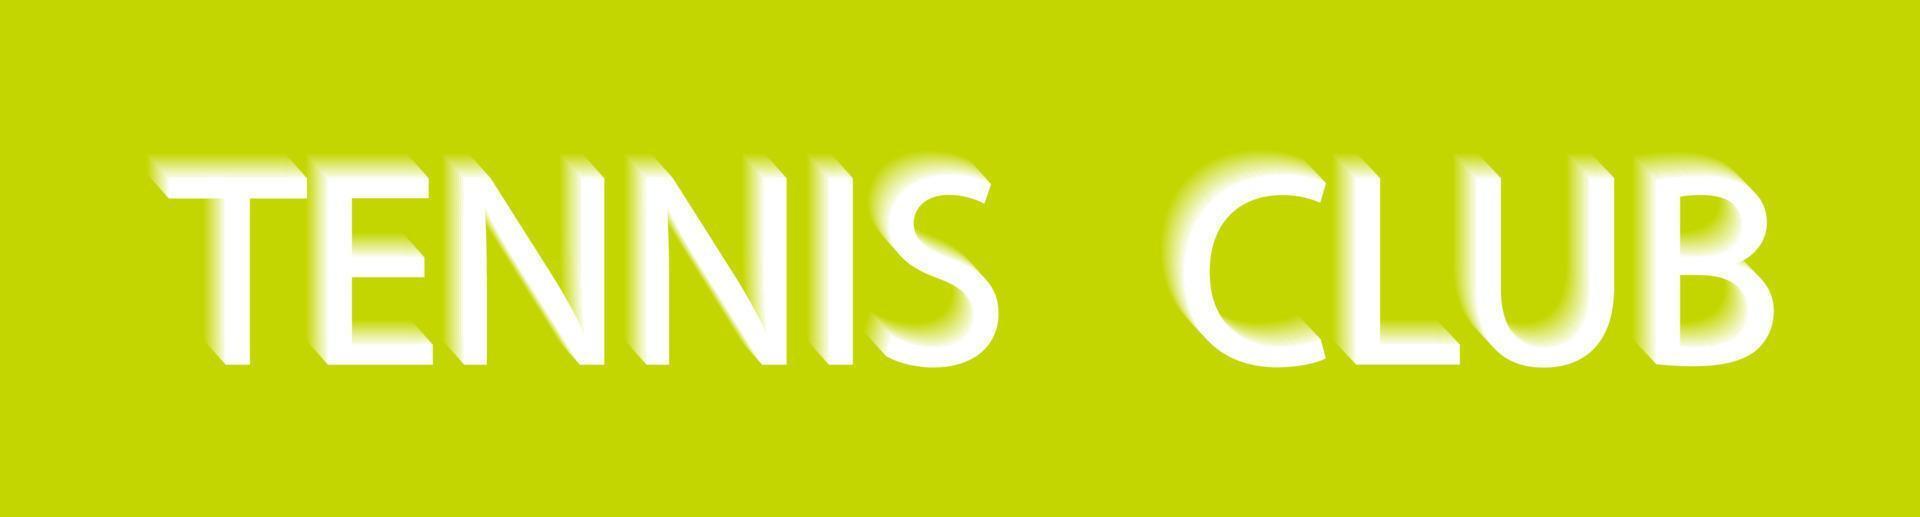 Tennis club banner. Vector white text with blur on green background. Sports tennis banner with the inscription.